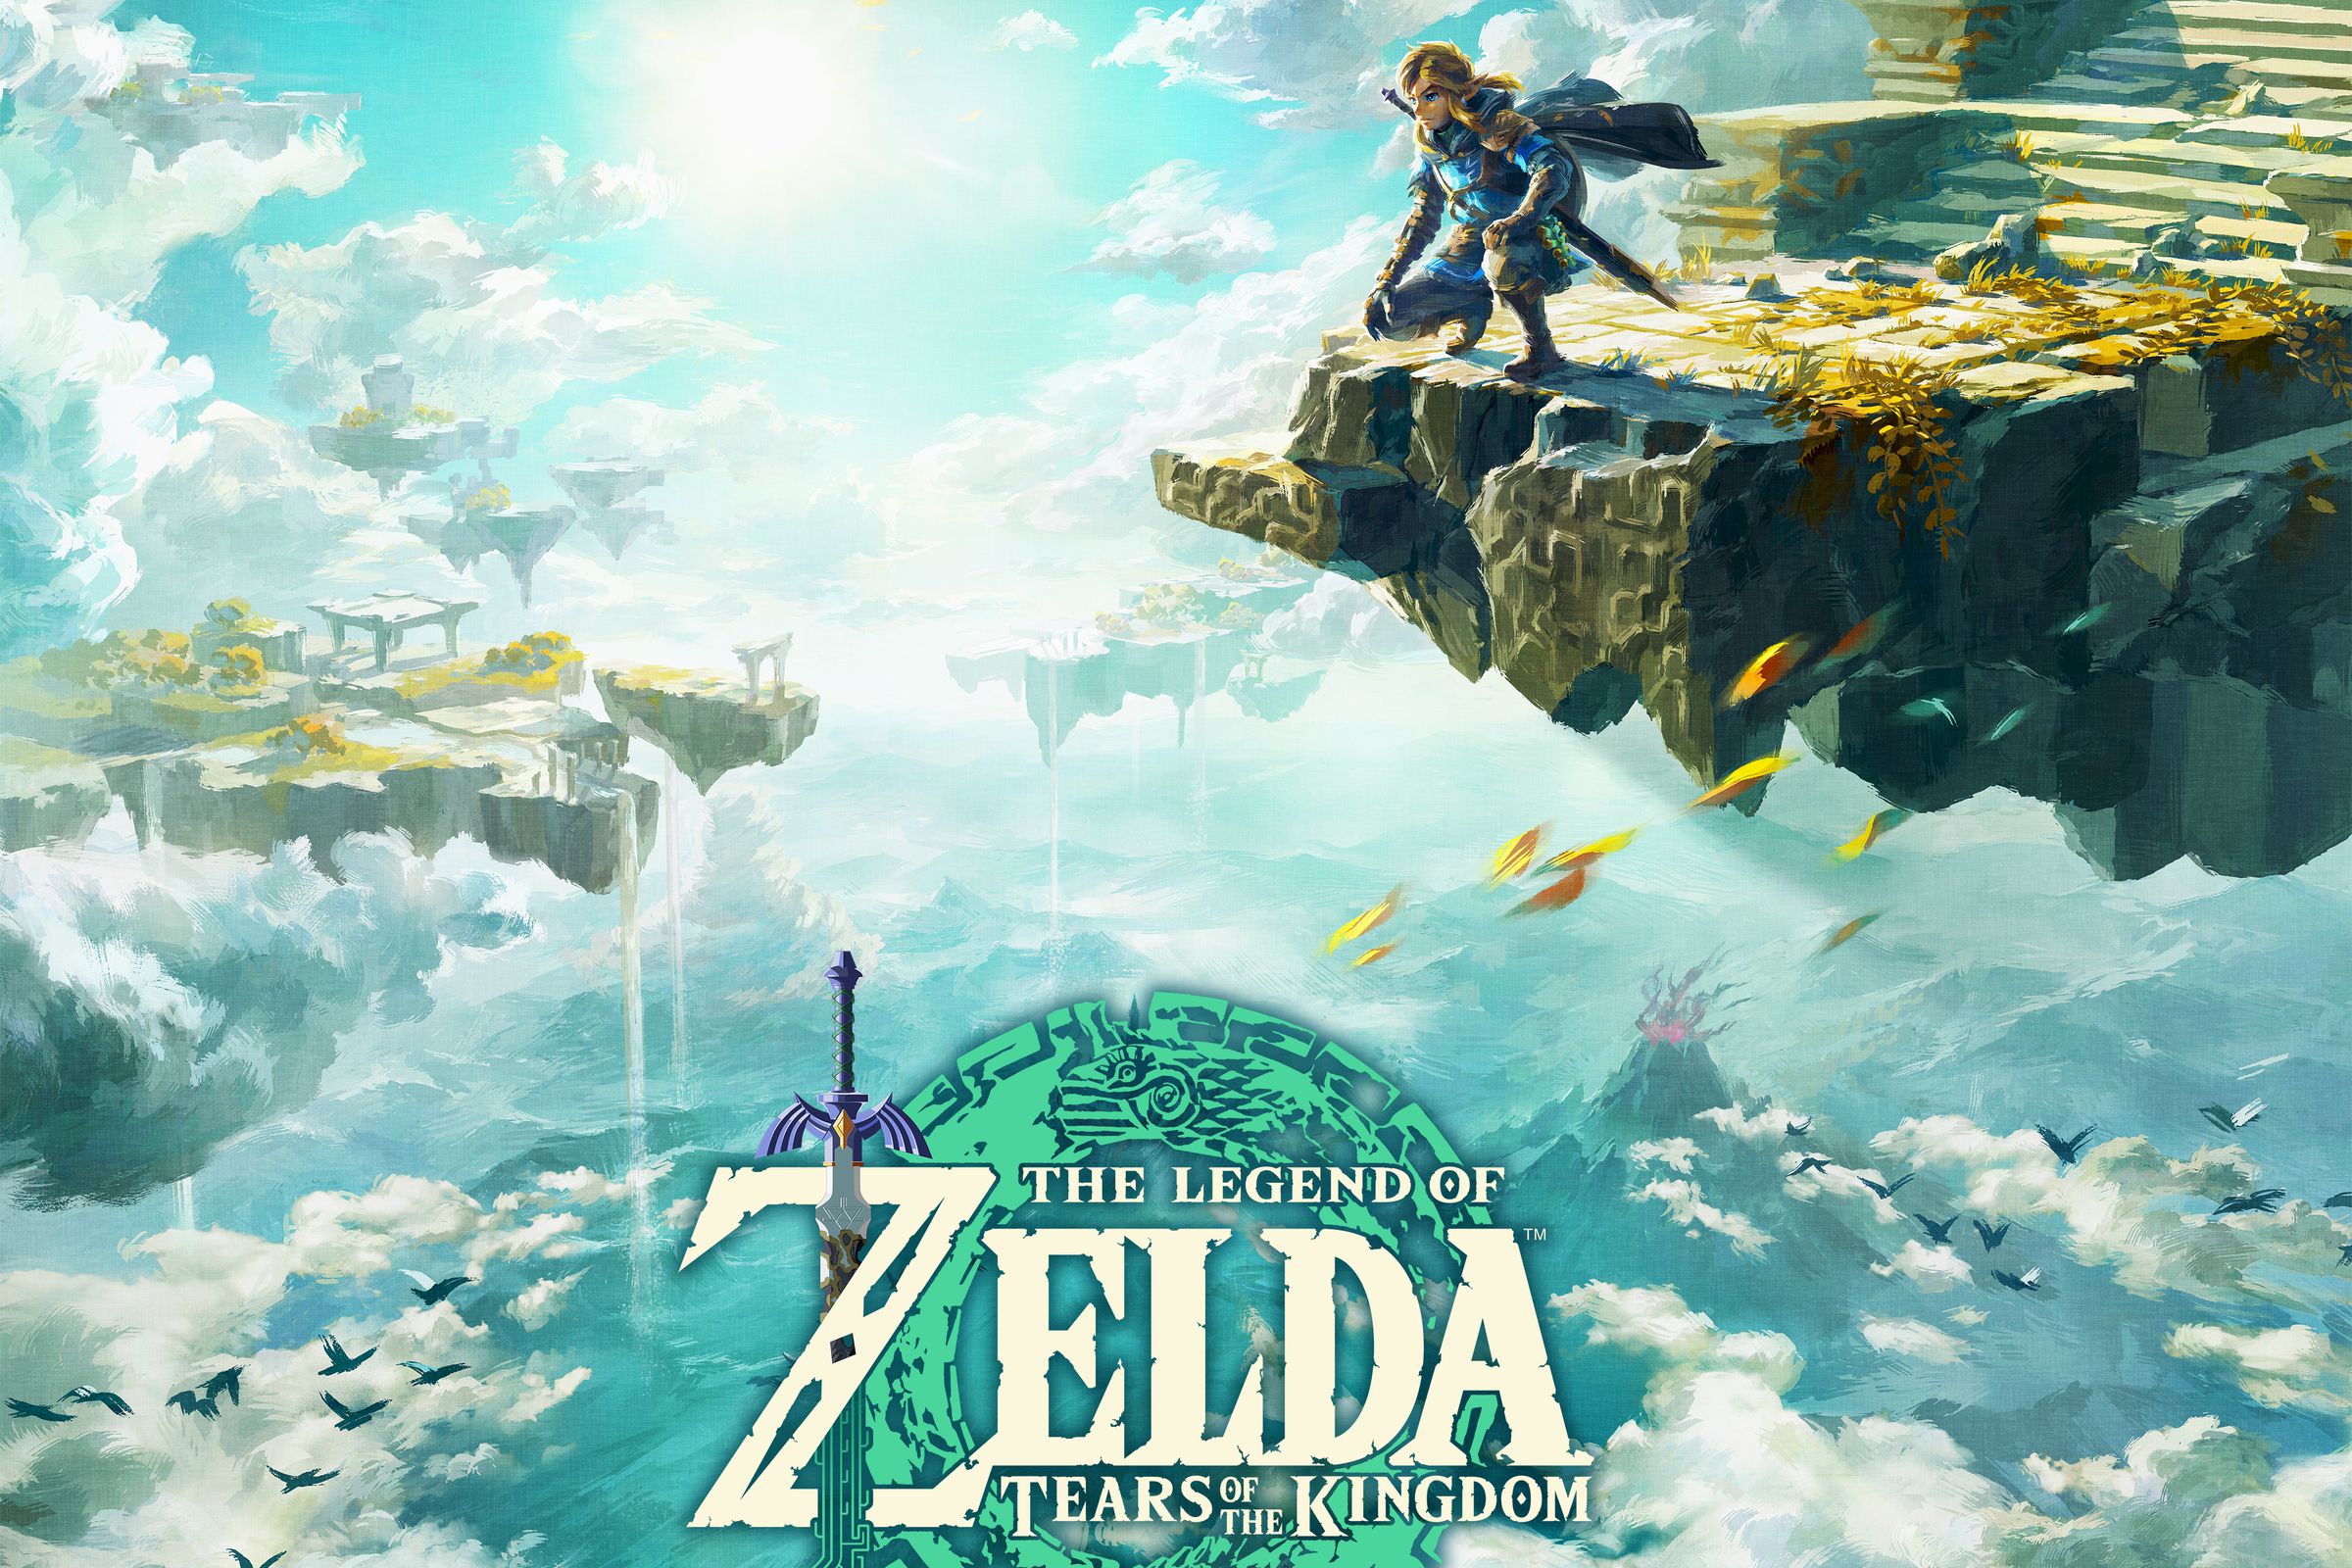 Link, wearing a blue cloak, kneels down at the edge of an island, hovering above the clouds. Other sky islands float in the background.